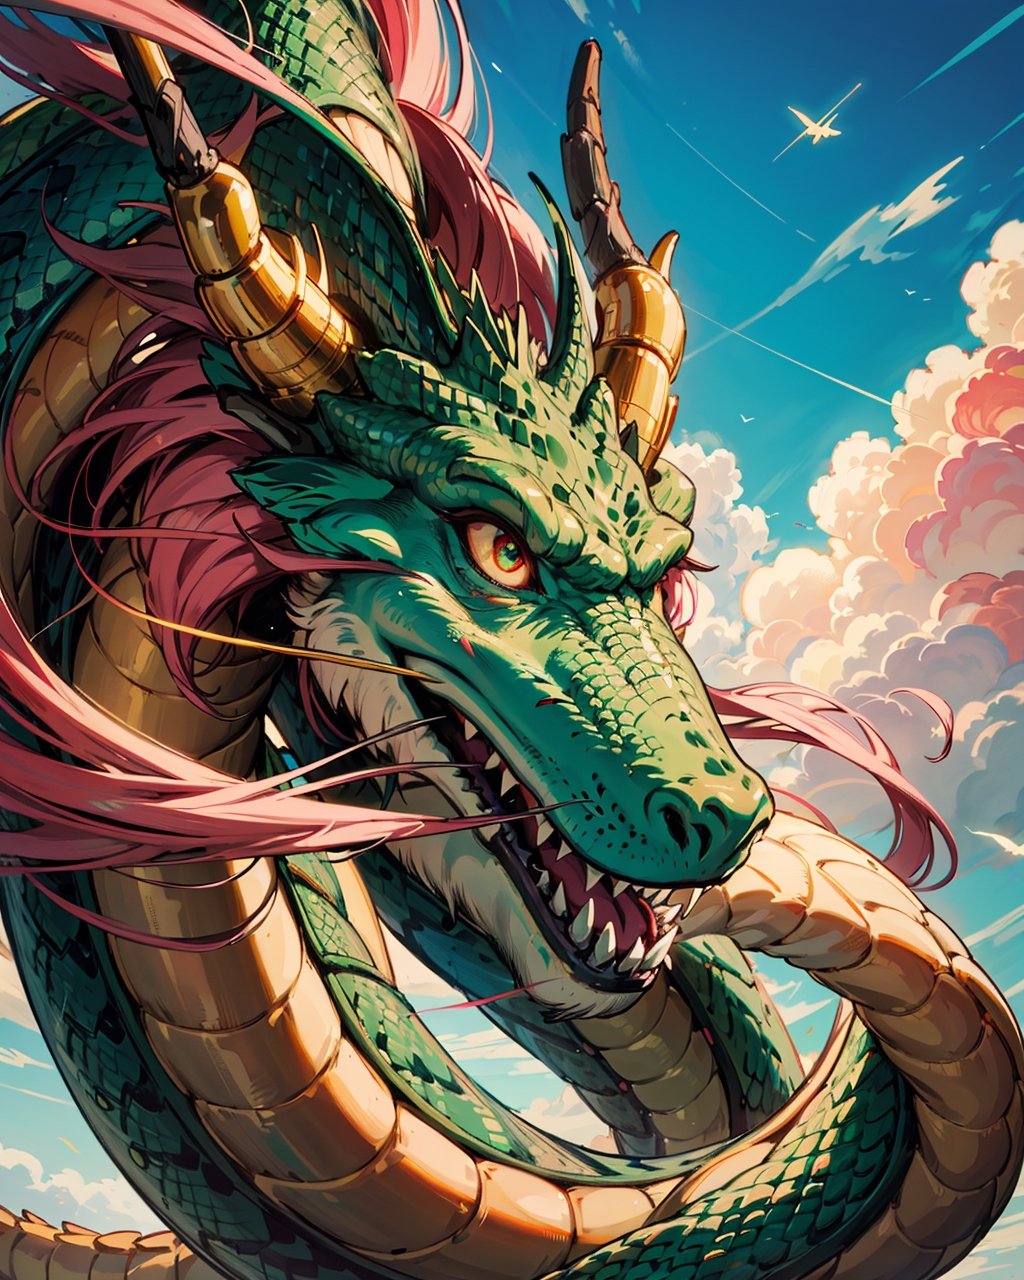 wyrm,shenlong, oriental dragon, day, beautifull eyes, golden, suny day, friendly, long whiskers, pink hair, floating debris, looking_at_viewer, asymetric, very long snake, intrincate details, realistic, close up, make up, blue sky, clouds, 